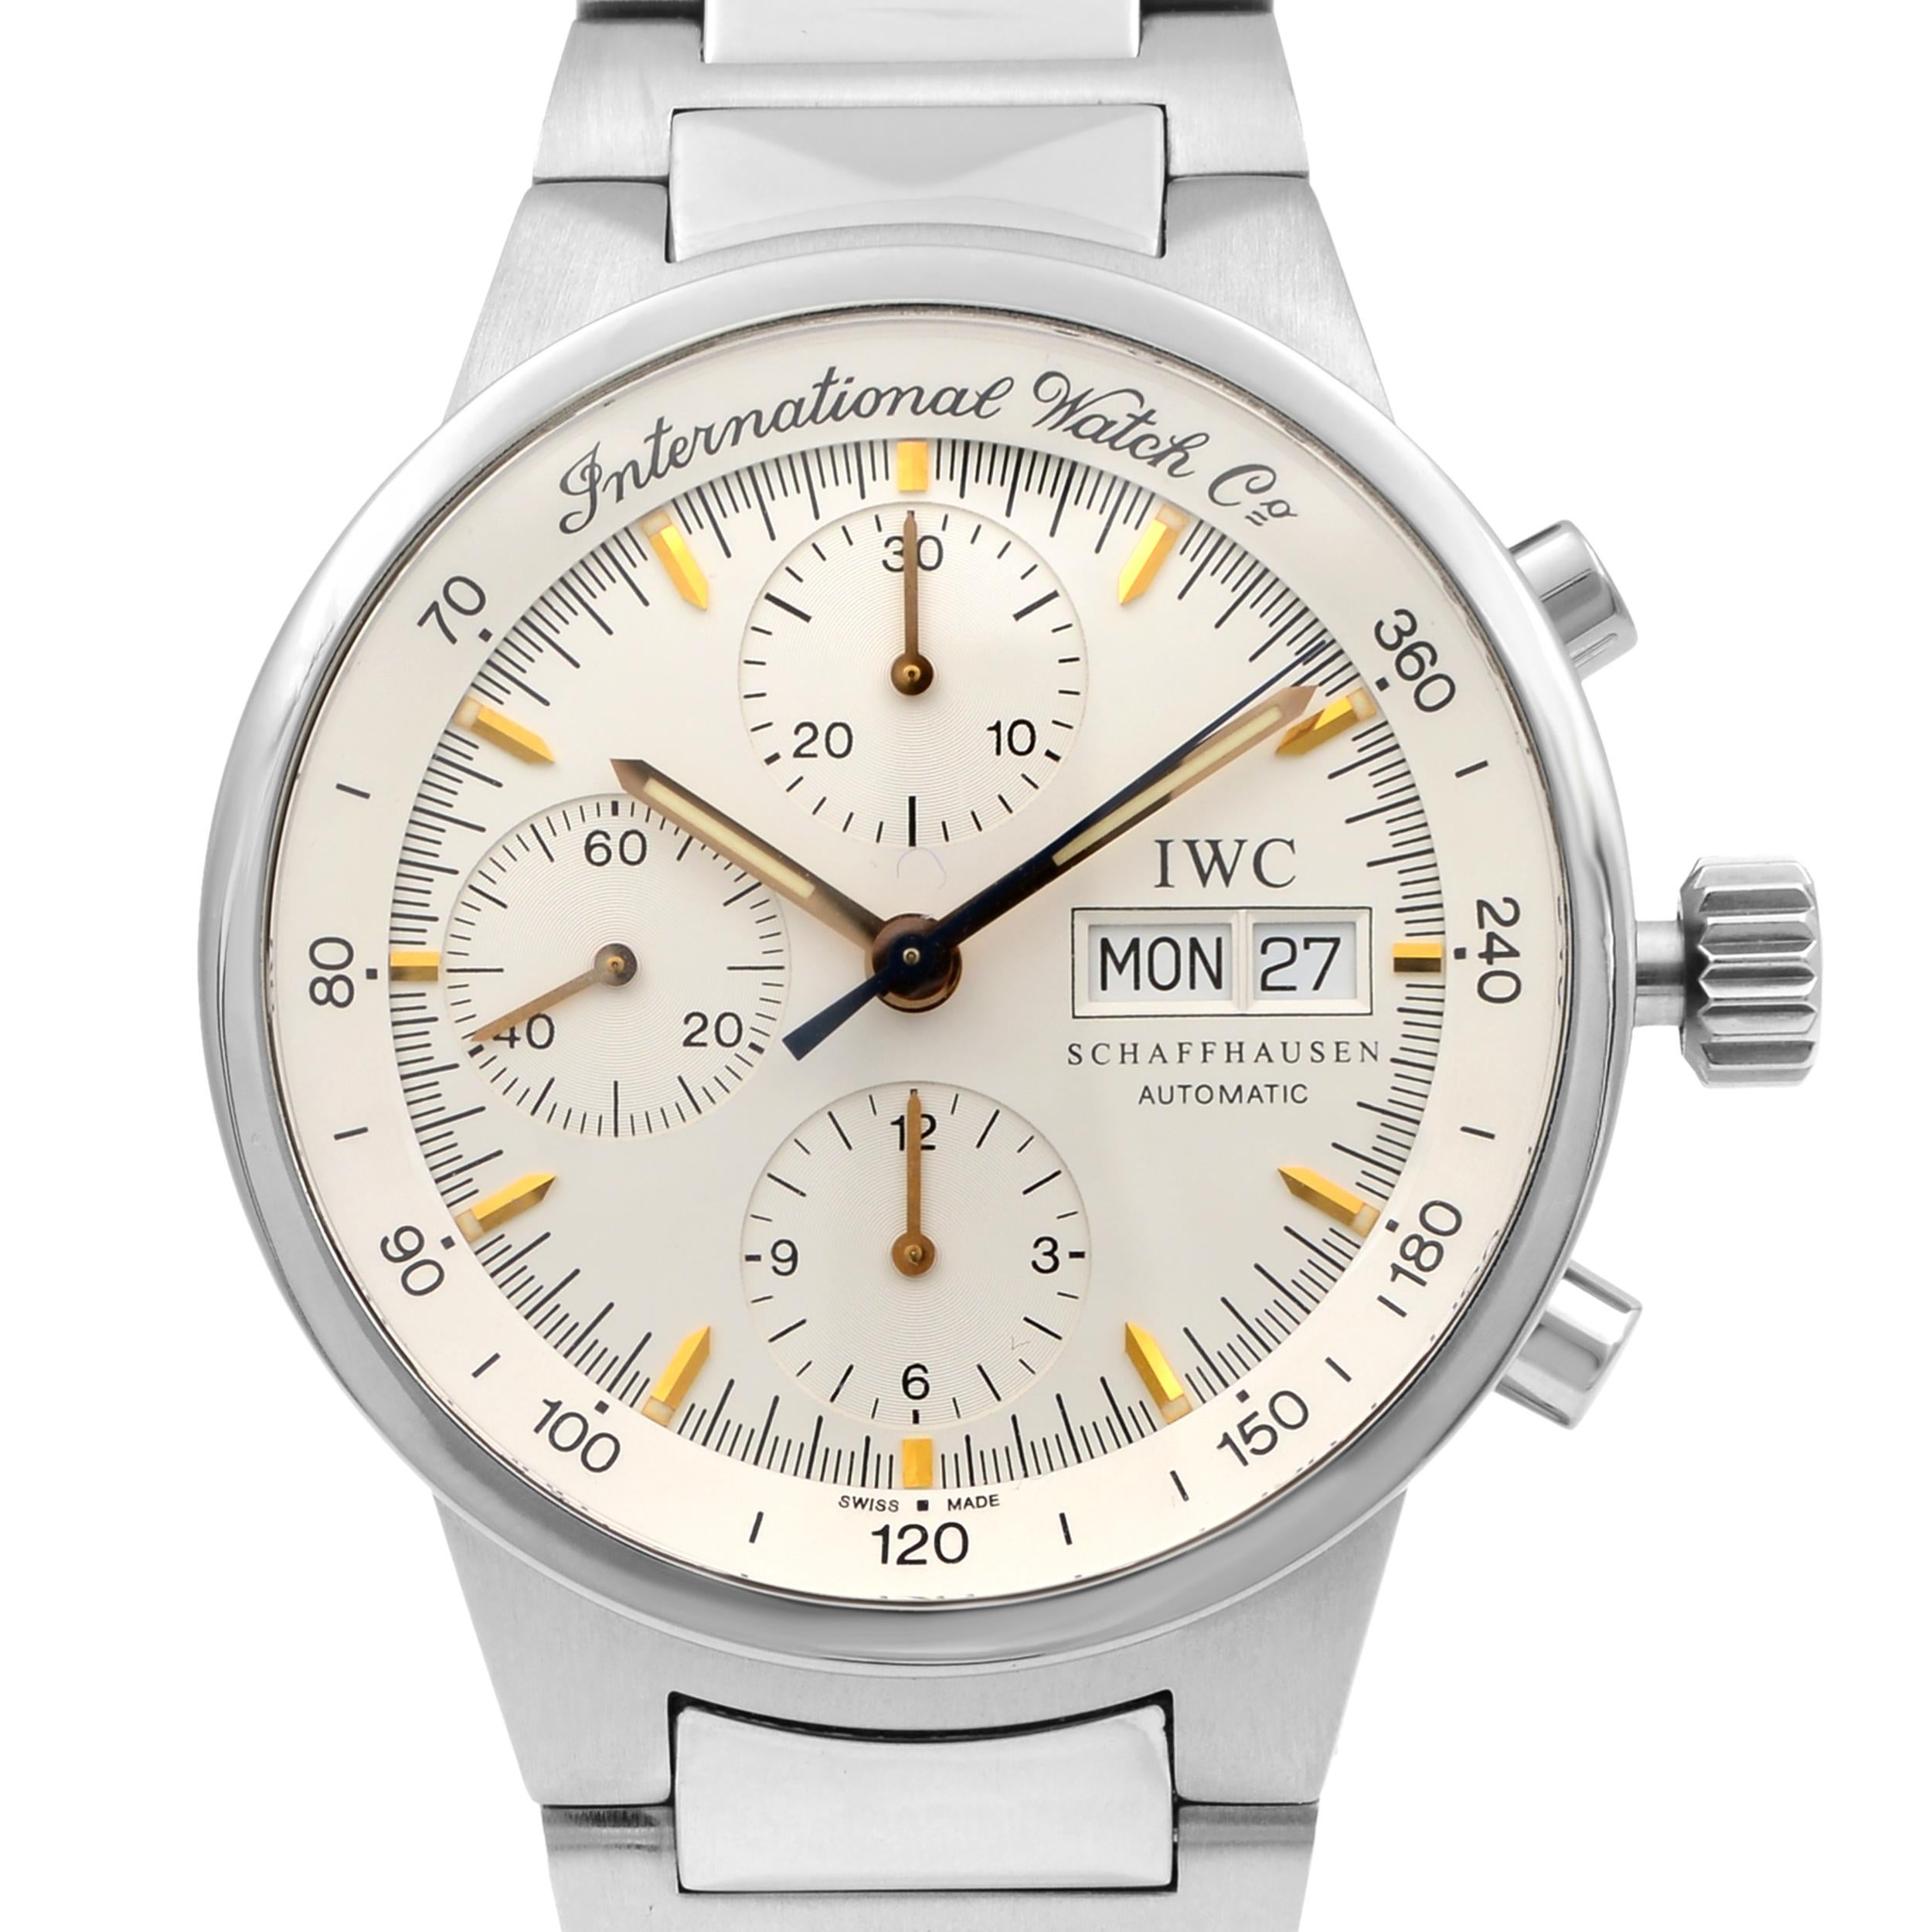 This pre-owned IWC GST  IW370713 is a beautiful men's timepiece that is powered by mechanical (automatic) movement which is cased in a stainless steel case. It has a round shape face, chronograph, day & date, small seconds subdial, tachymeter dial